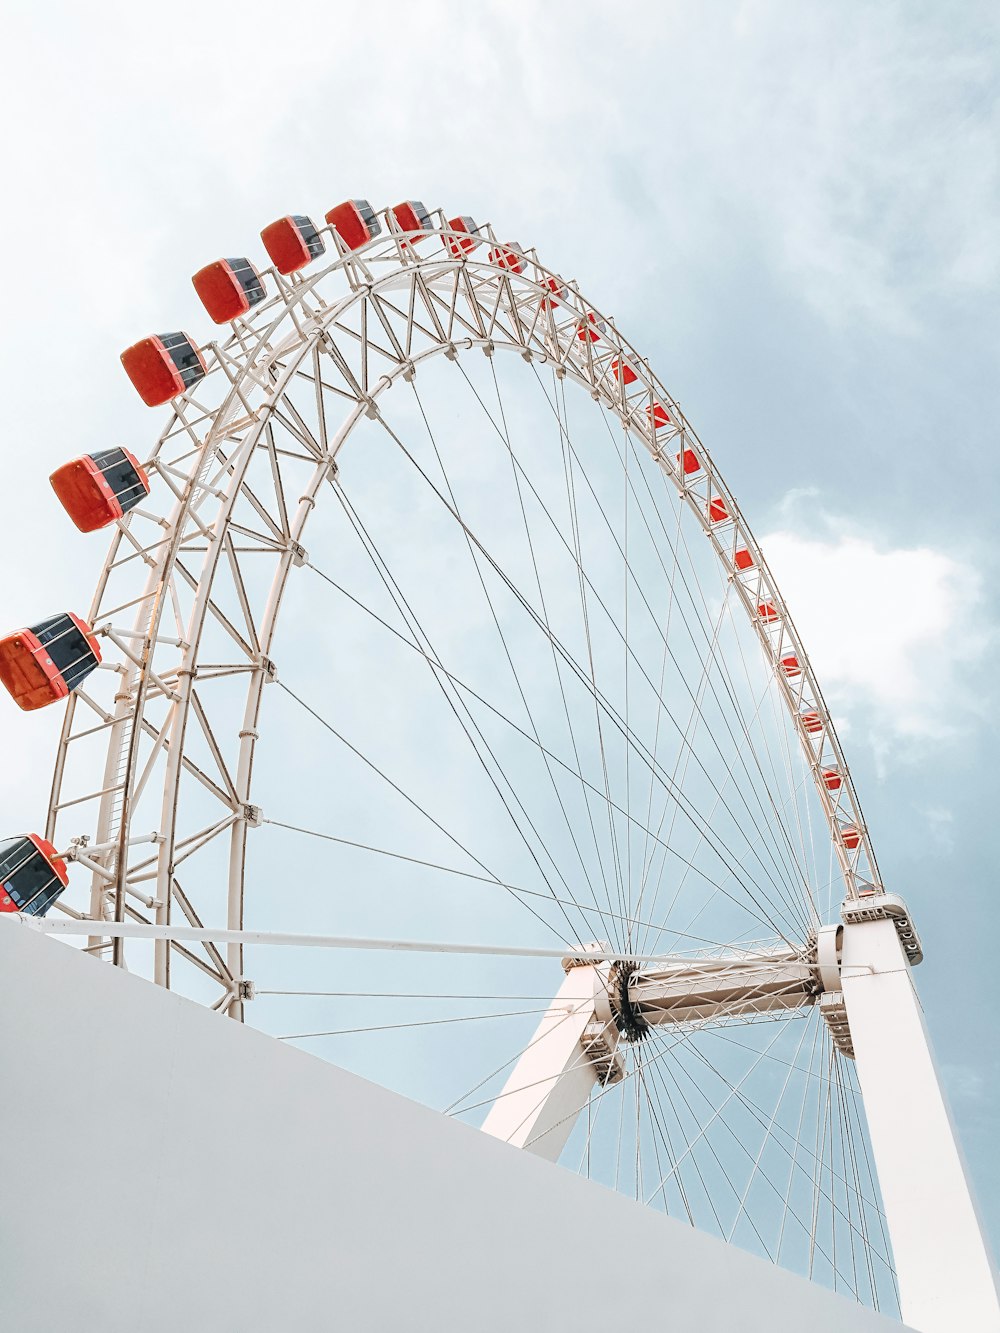 white and red ferris wheel under cloudy sky during daytime